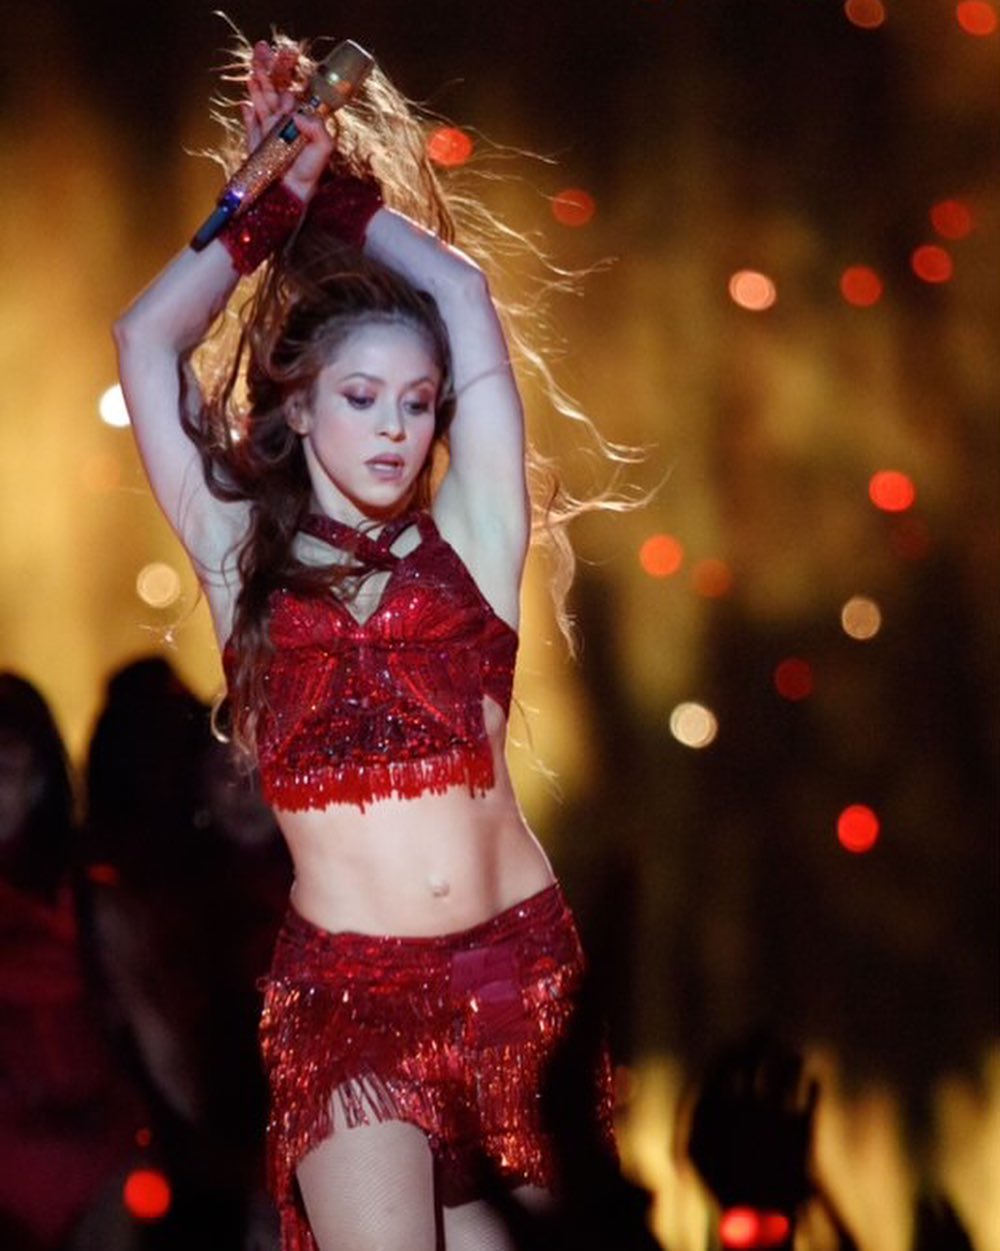  During Superbowl half time  shakira performed on her hit songs and the audience present in the stadium couldn't stop rooting for her from the stands.  (Image: Instagram/Shakira)